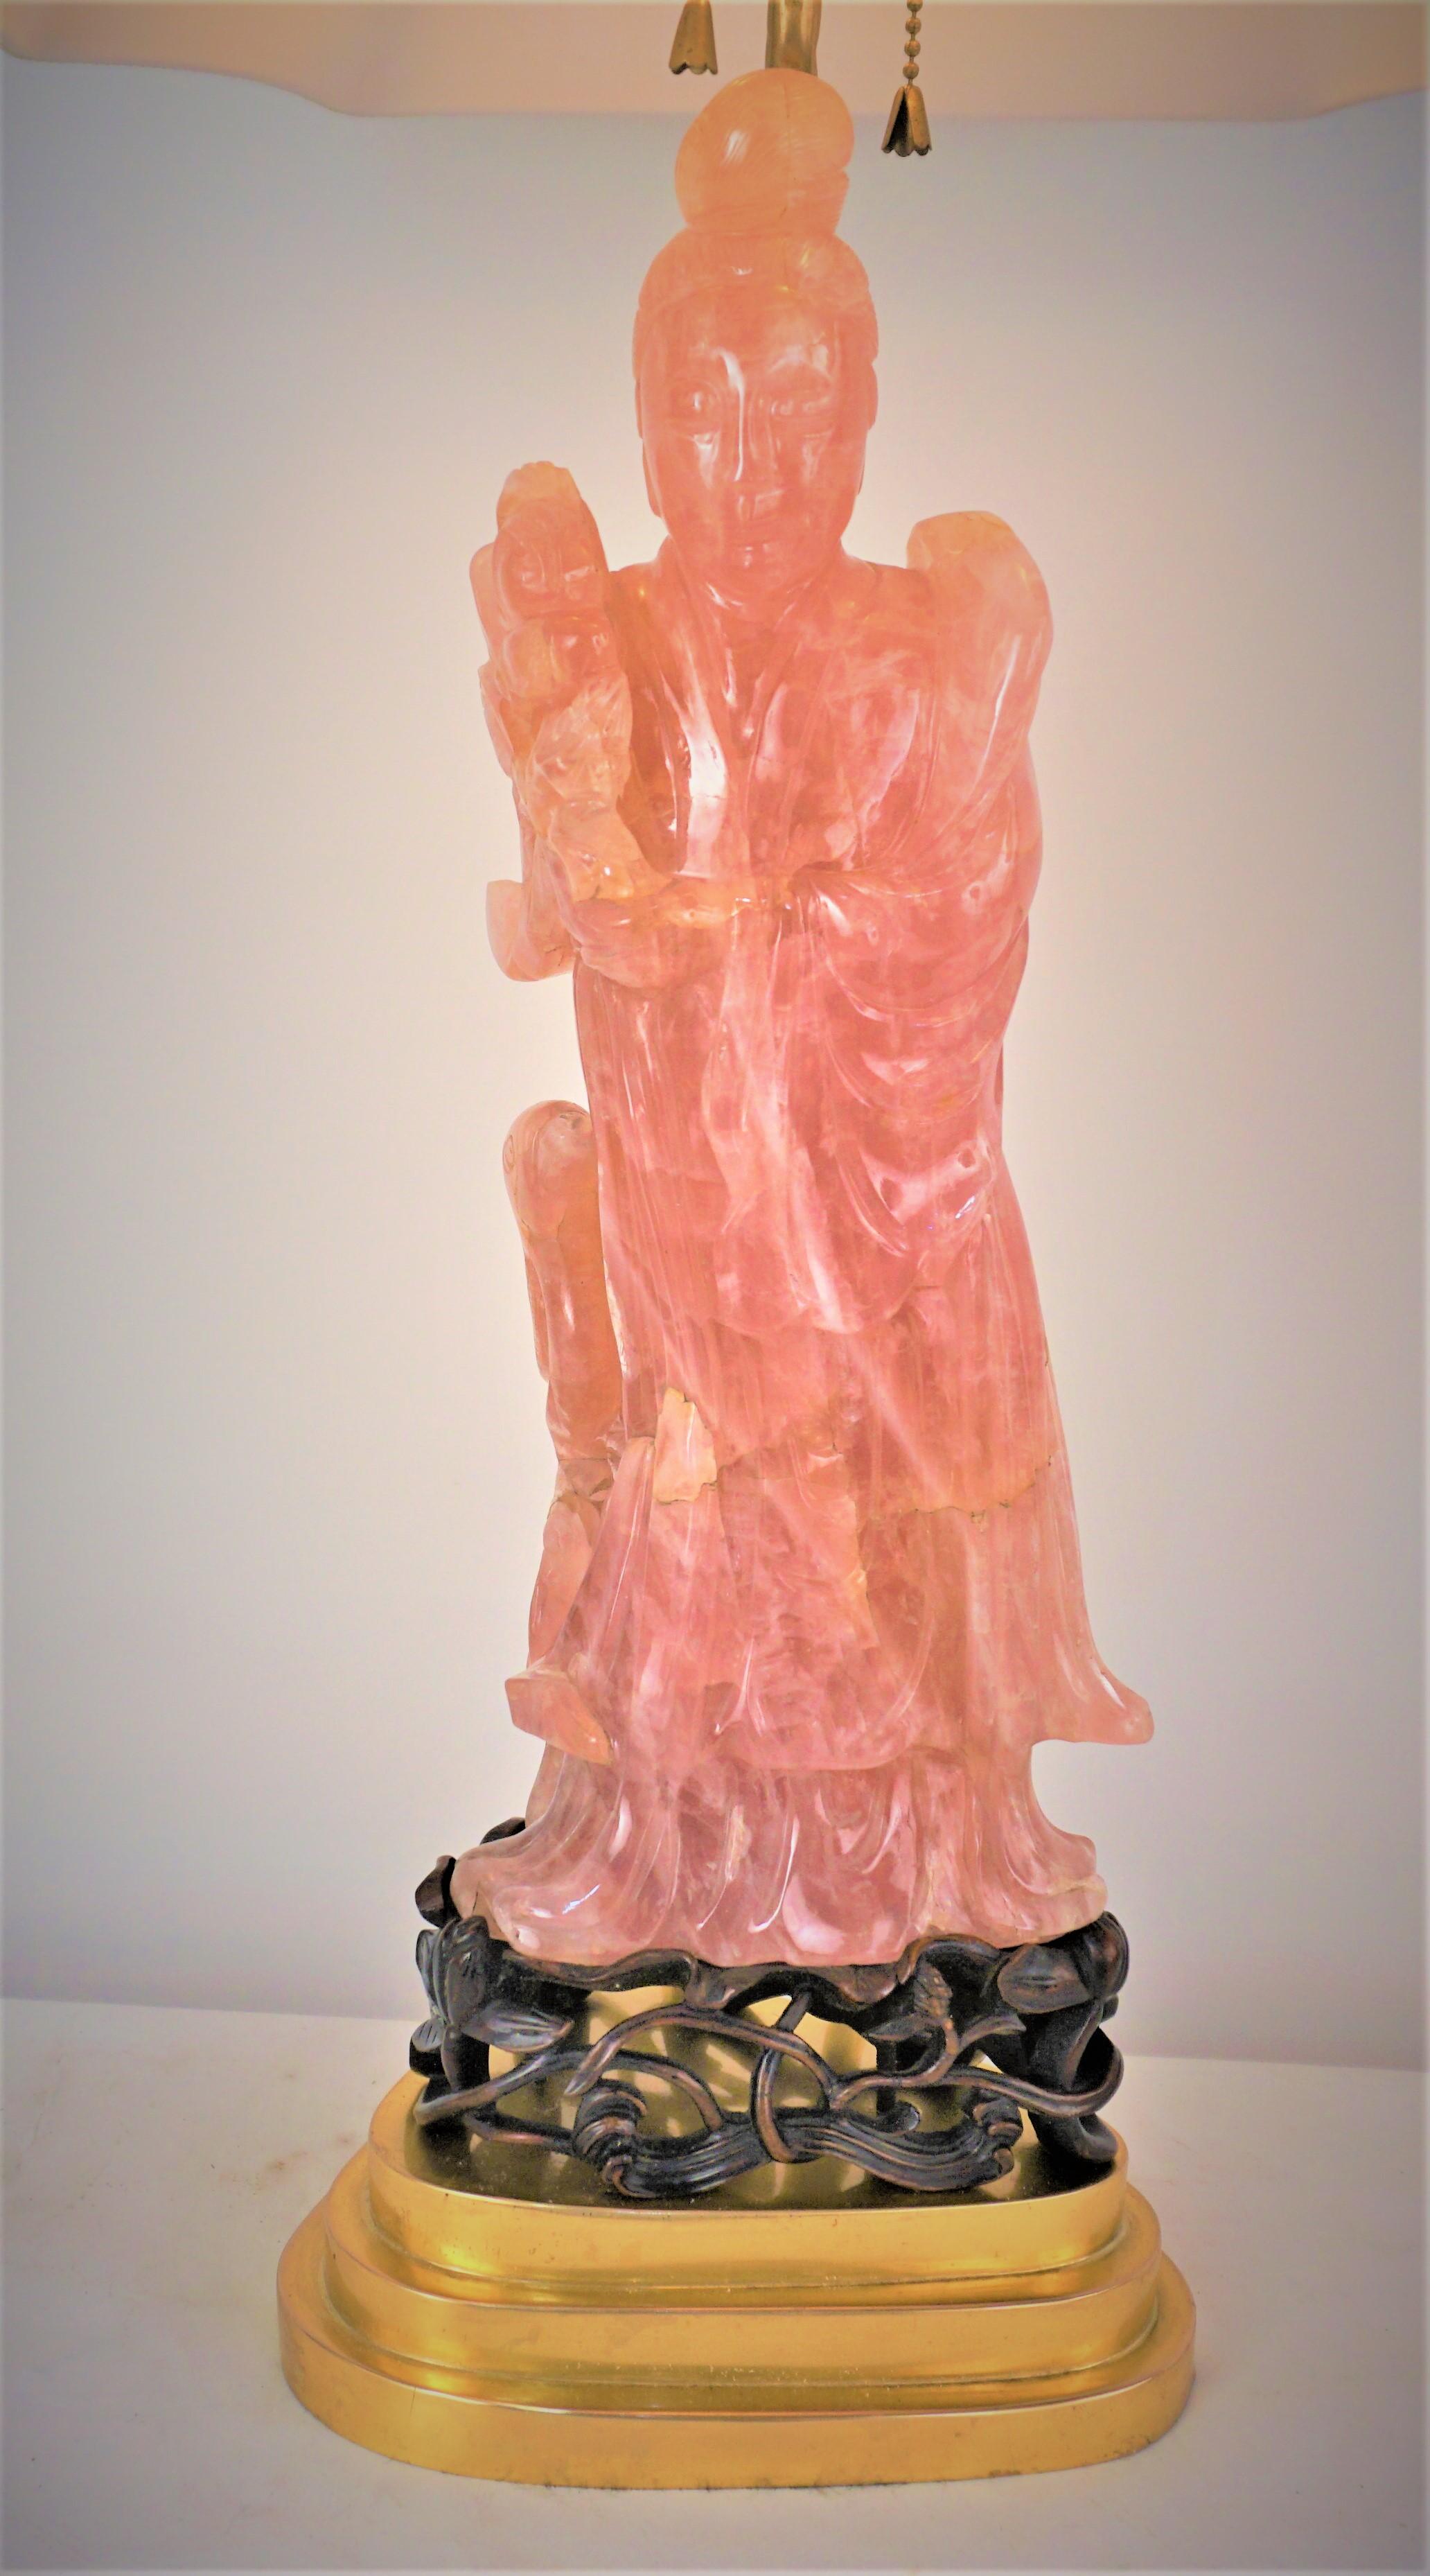 Chinese pink quartz sitting on carved rose wood base.
Customized to a table lamp with gilt bronze base.
Professionally rewired with double sockets.
Measurement includes the lampshade.